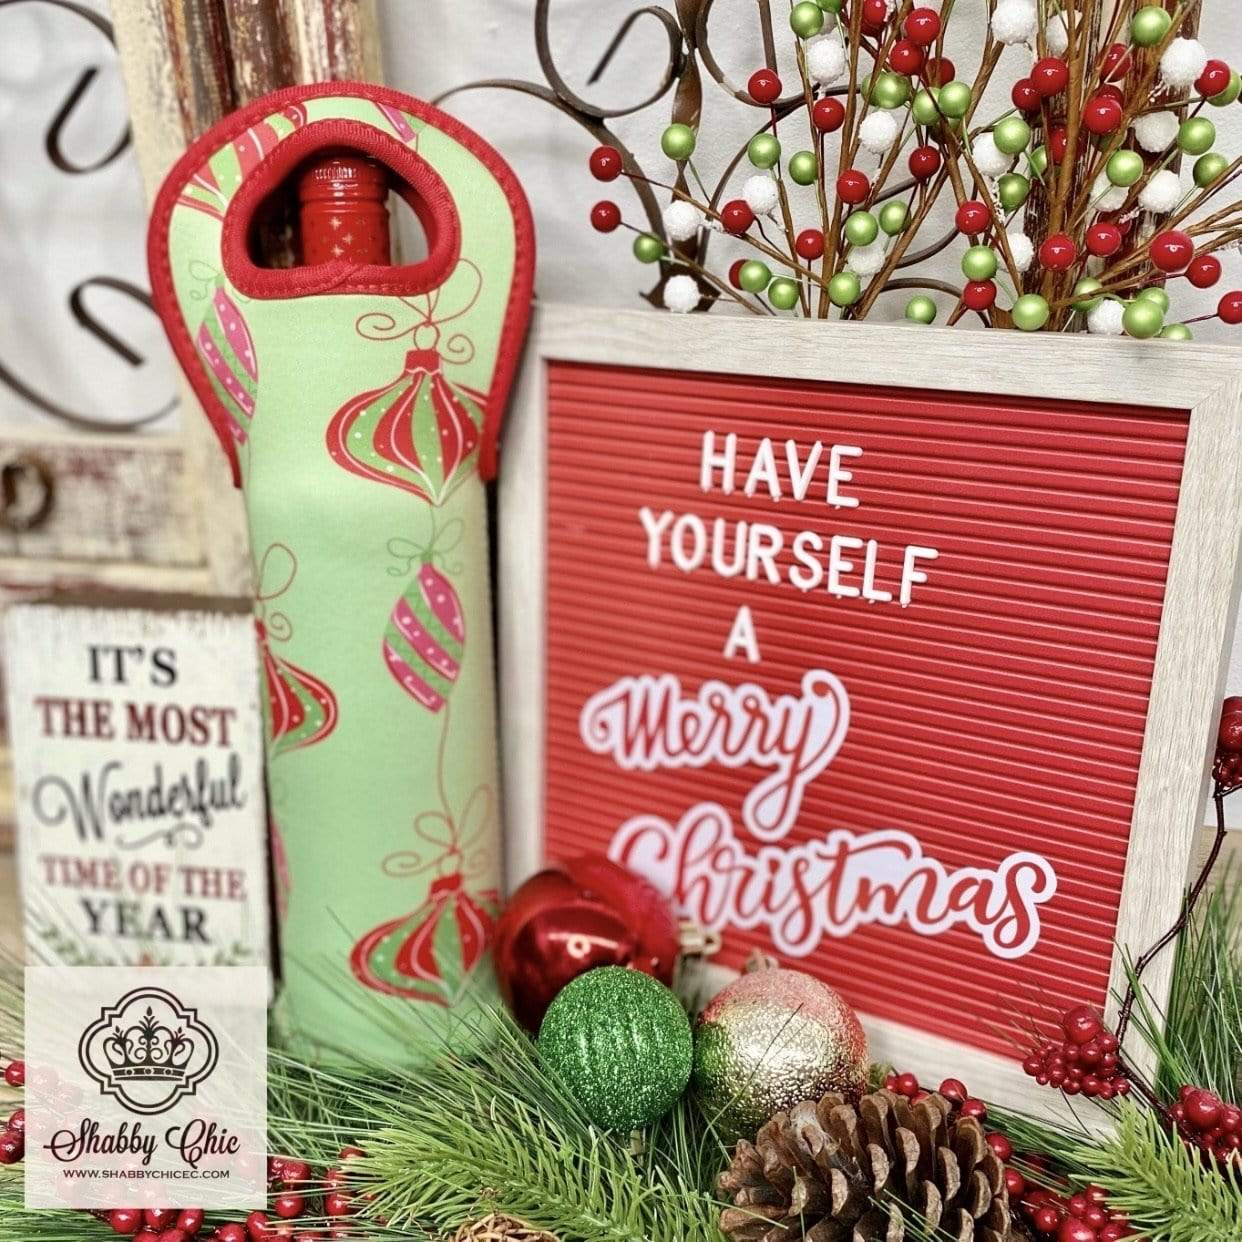 Festive Wine Bottle Coolers Shabby Chic Boutique and Tanning Salon Ornaments